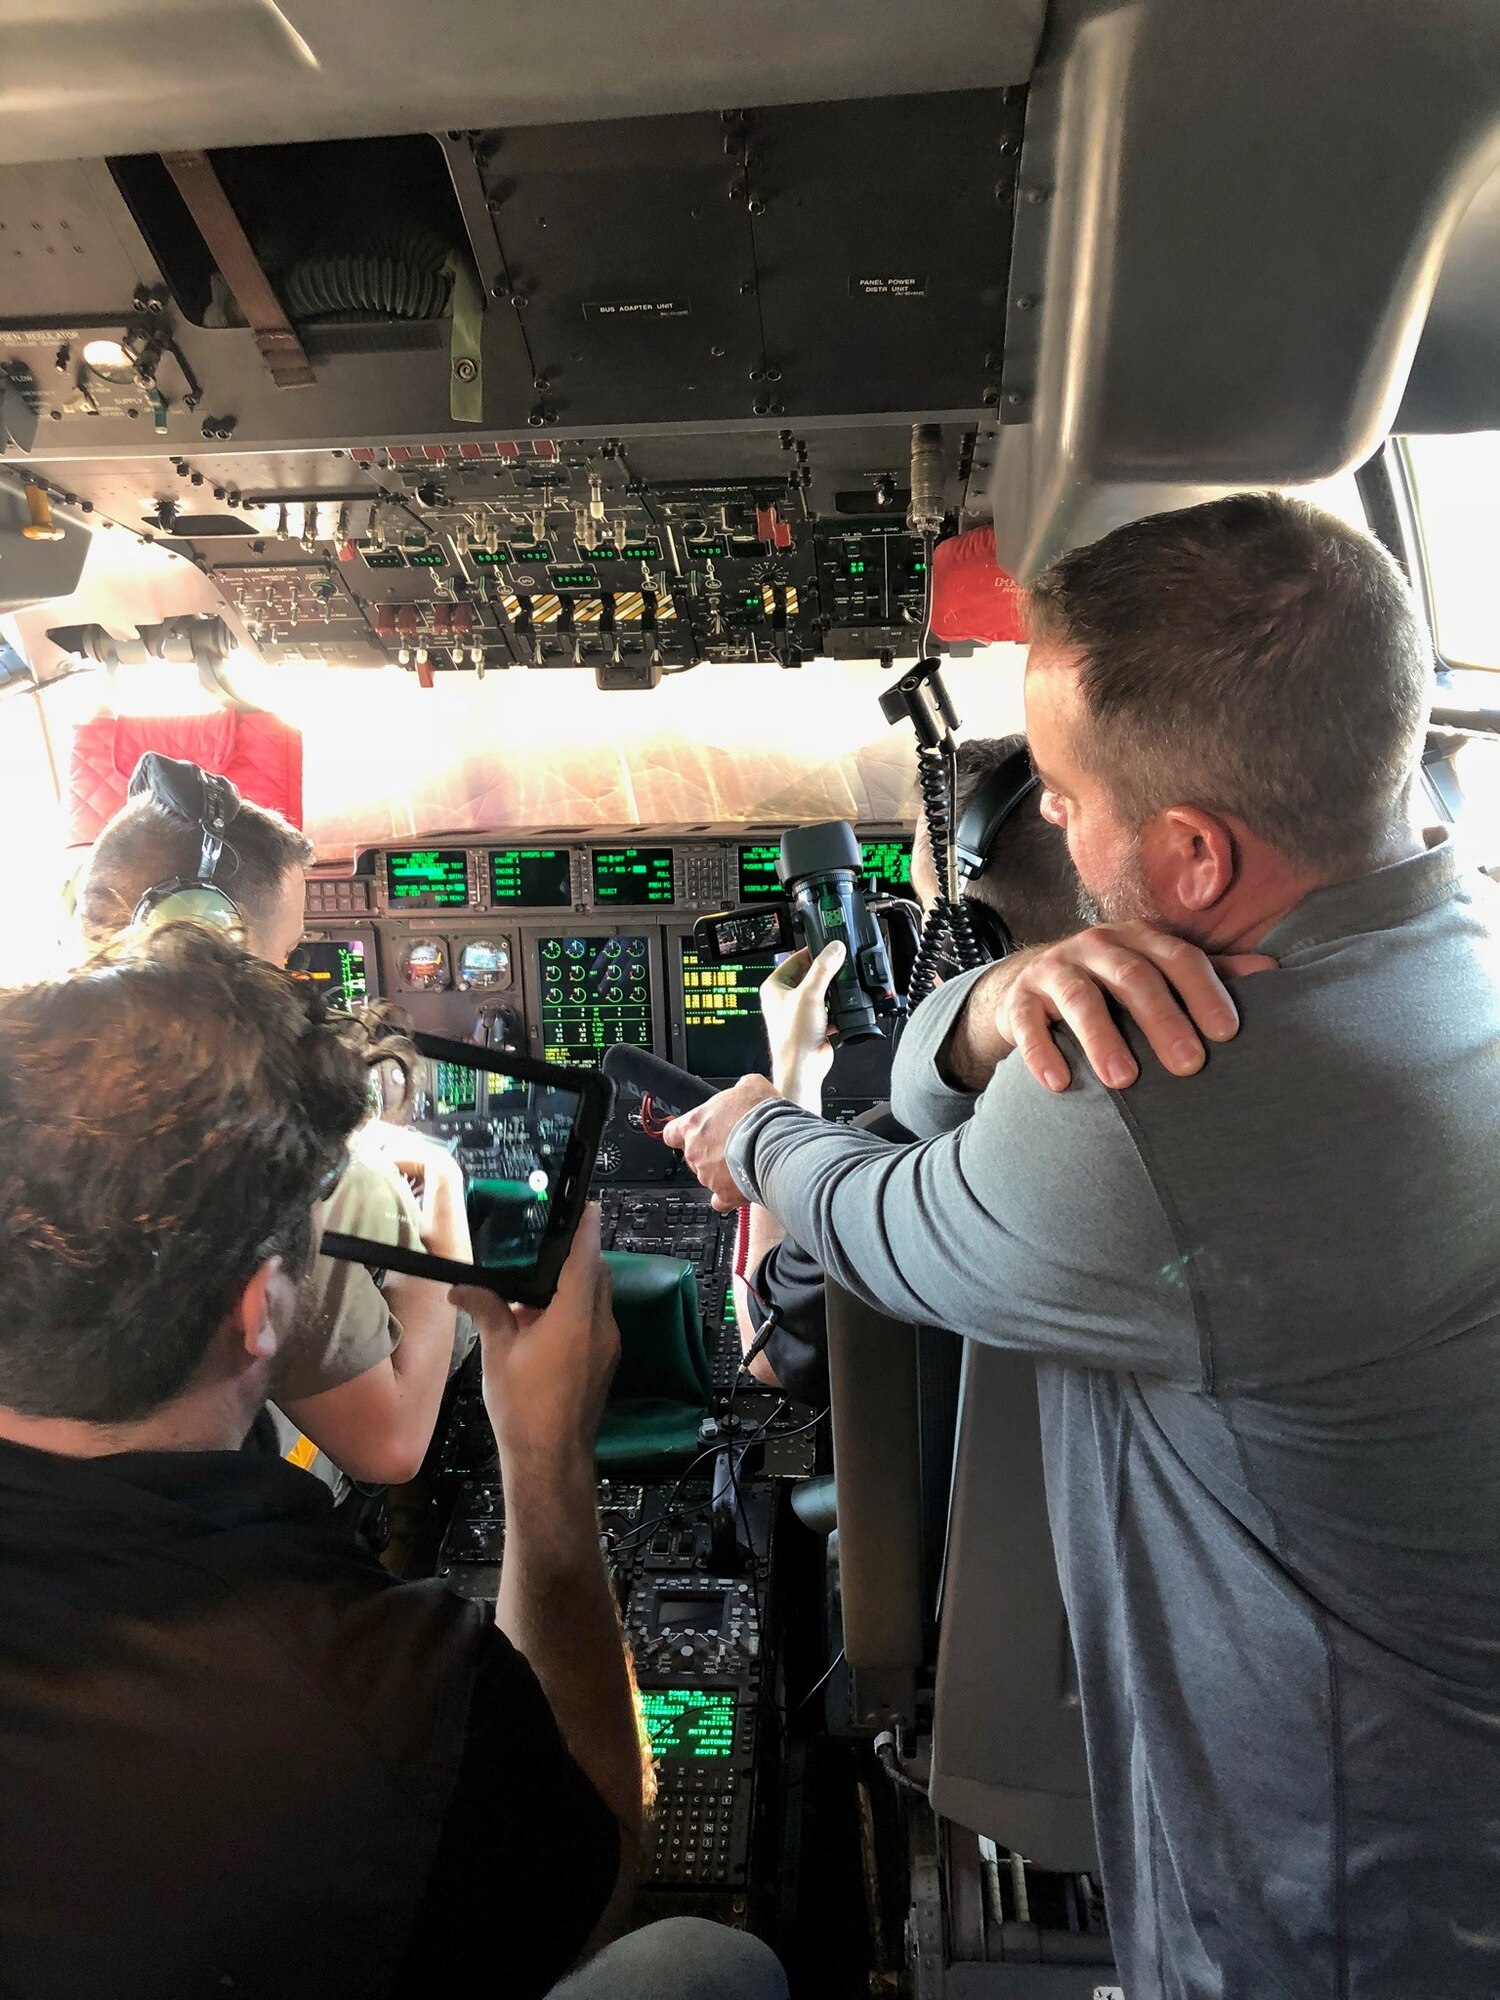 A Mass Virtual team member scan the flight deck of a C-130J Super Hercules to design a virtual reality environment to train C-130 maintainers.